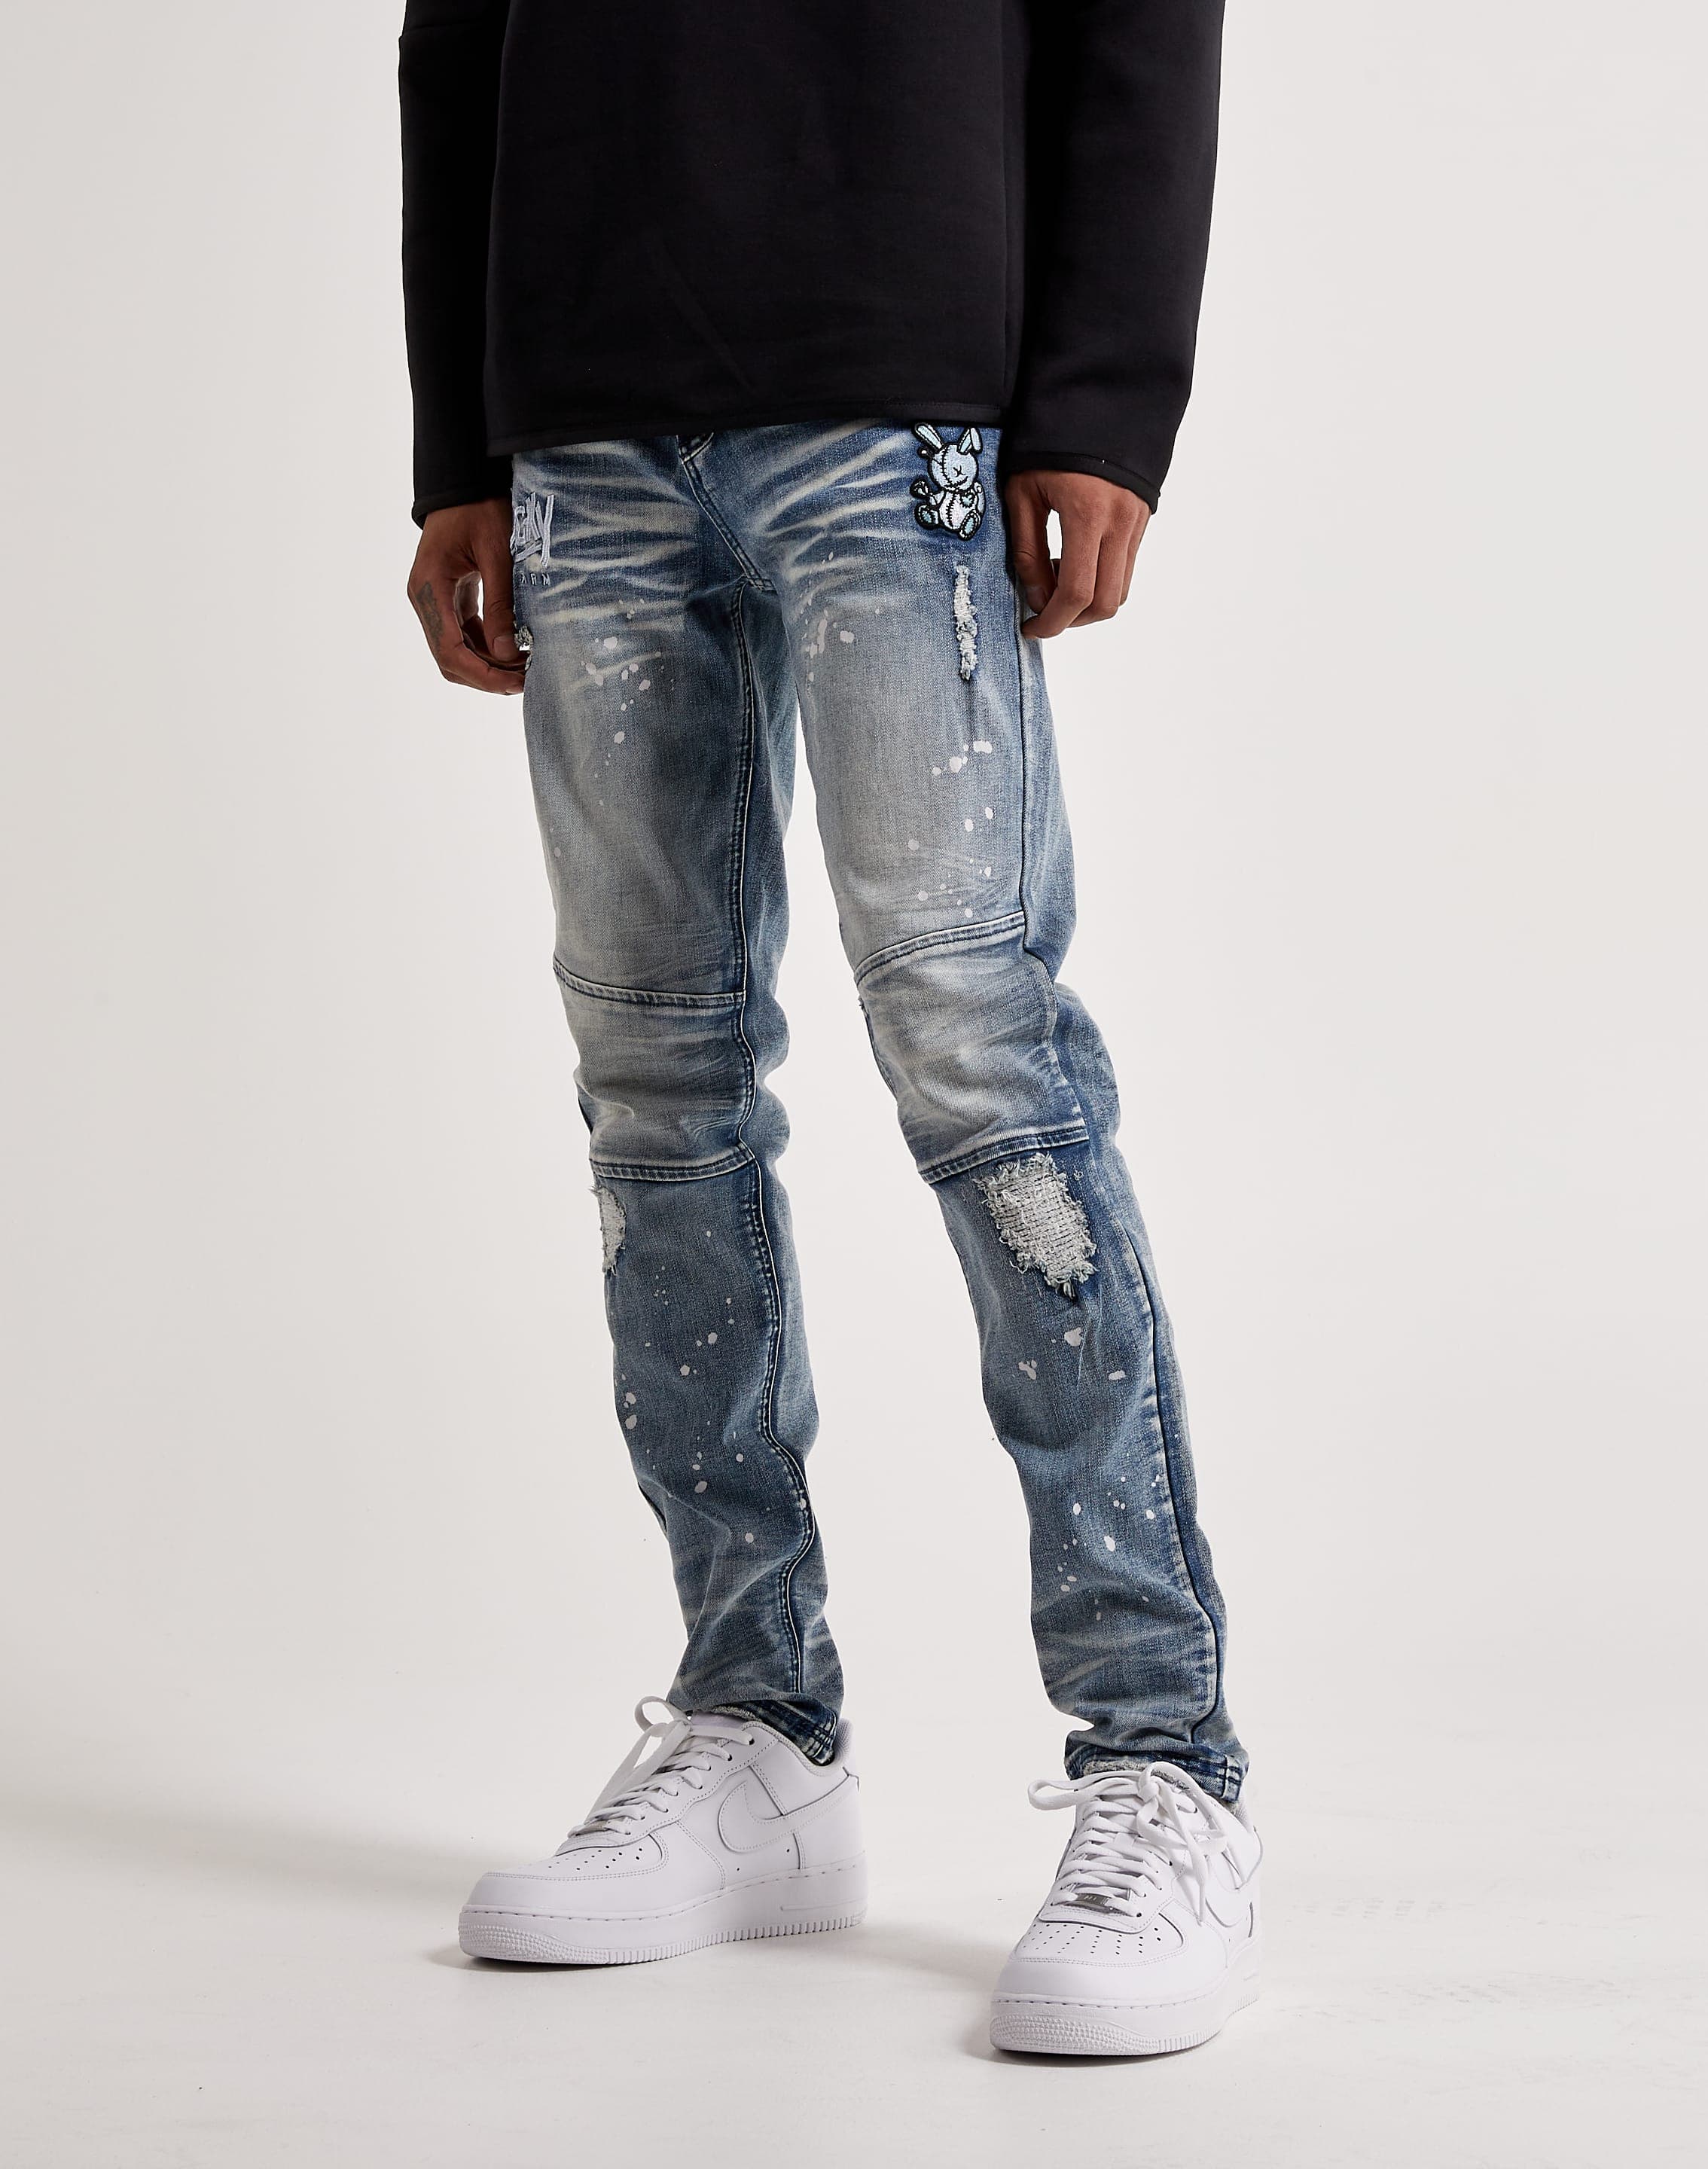 BKYS Lucky Charm 2.0 Jeans – DTLR